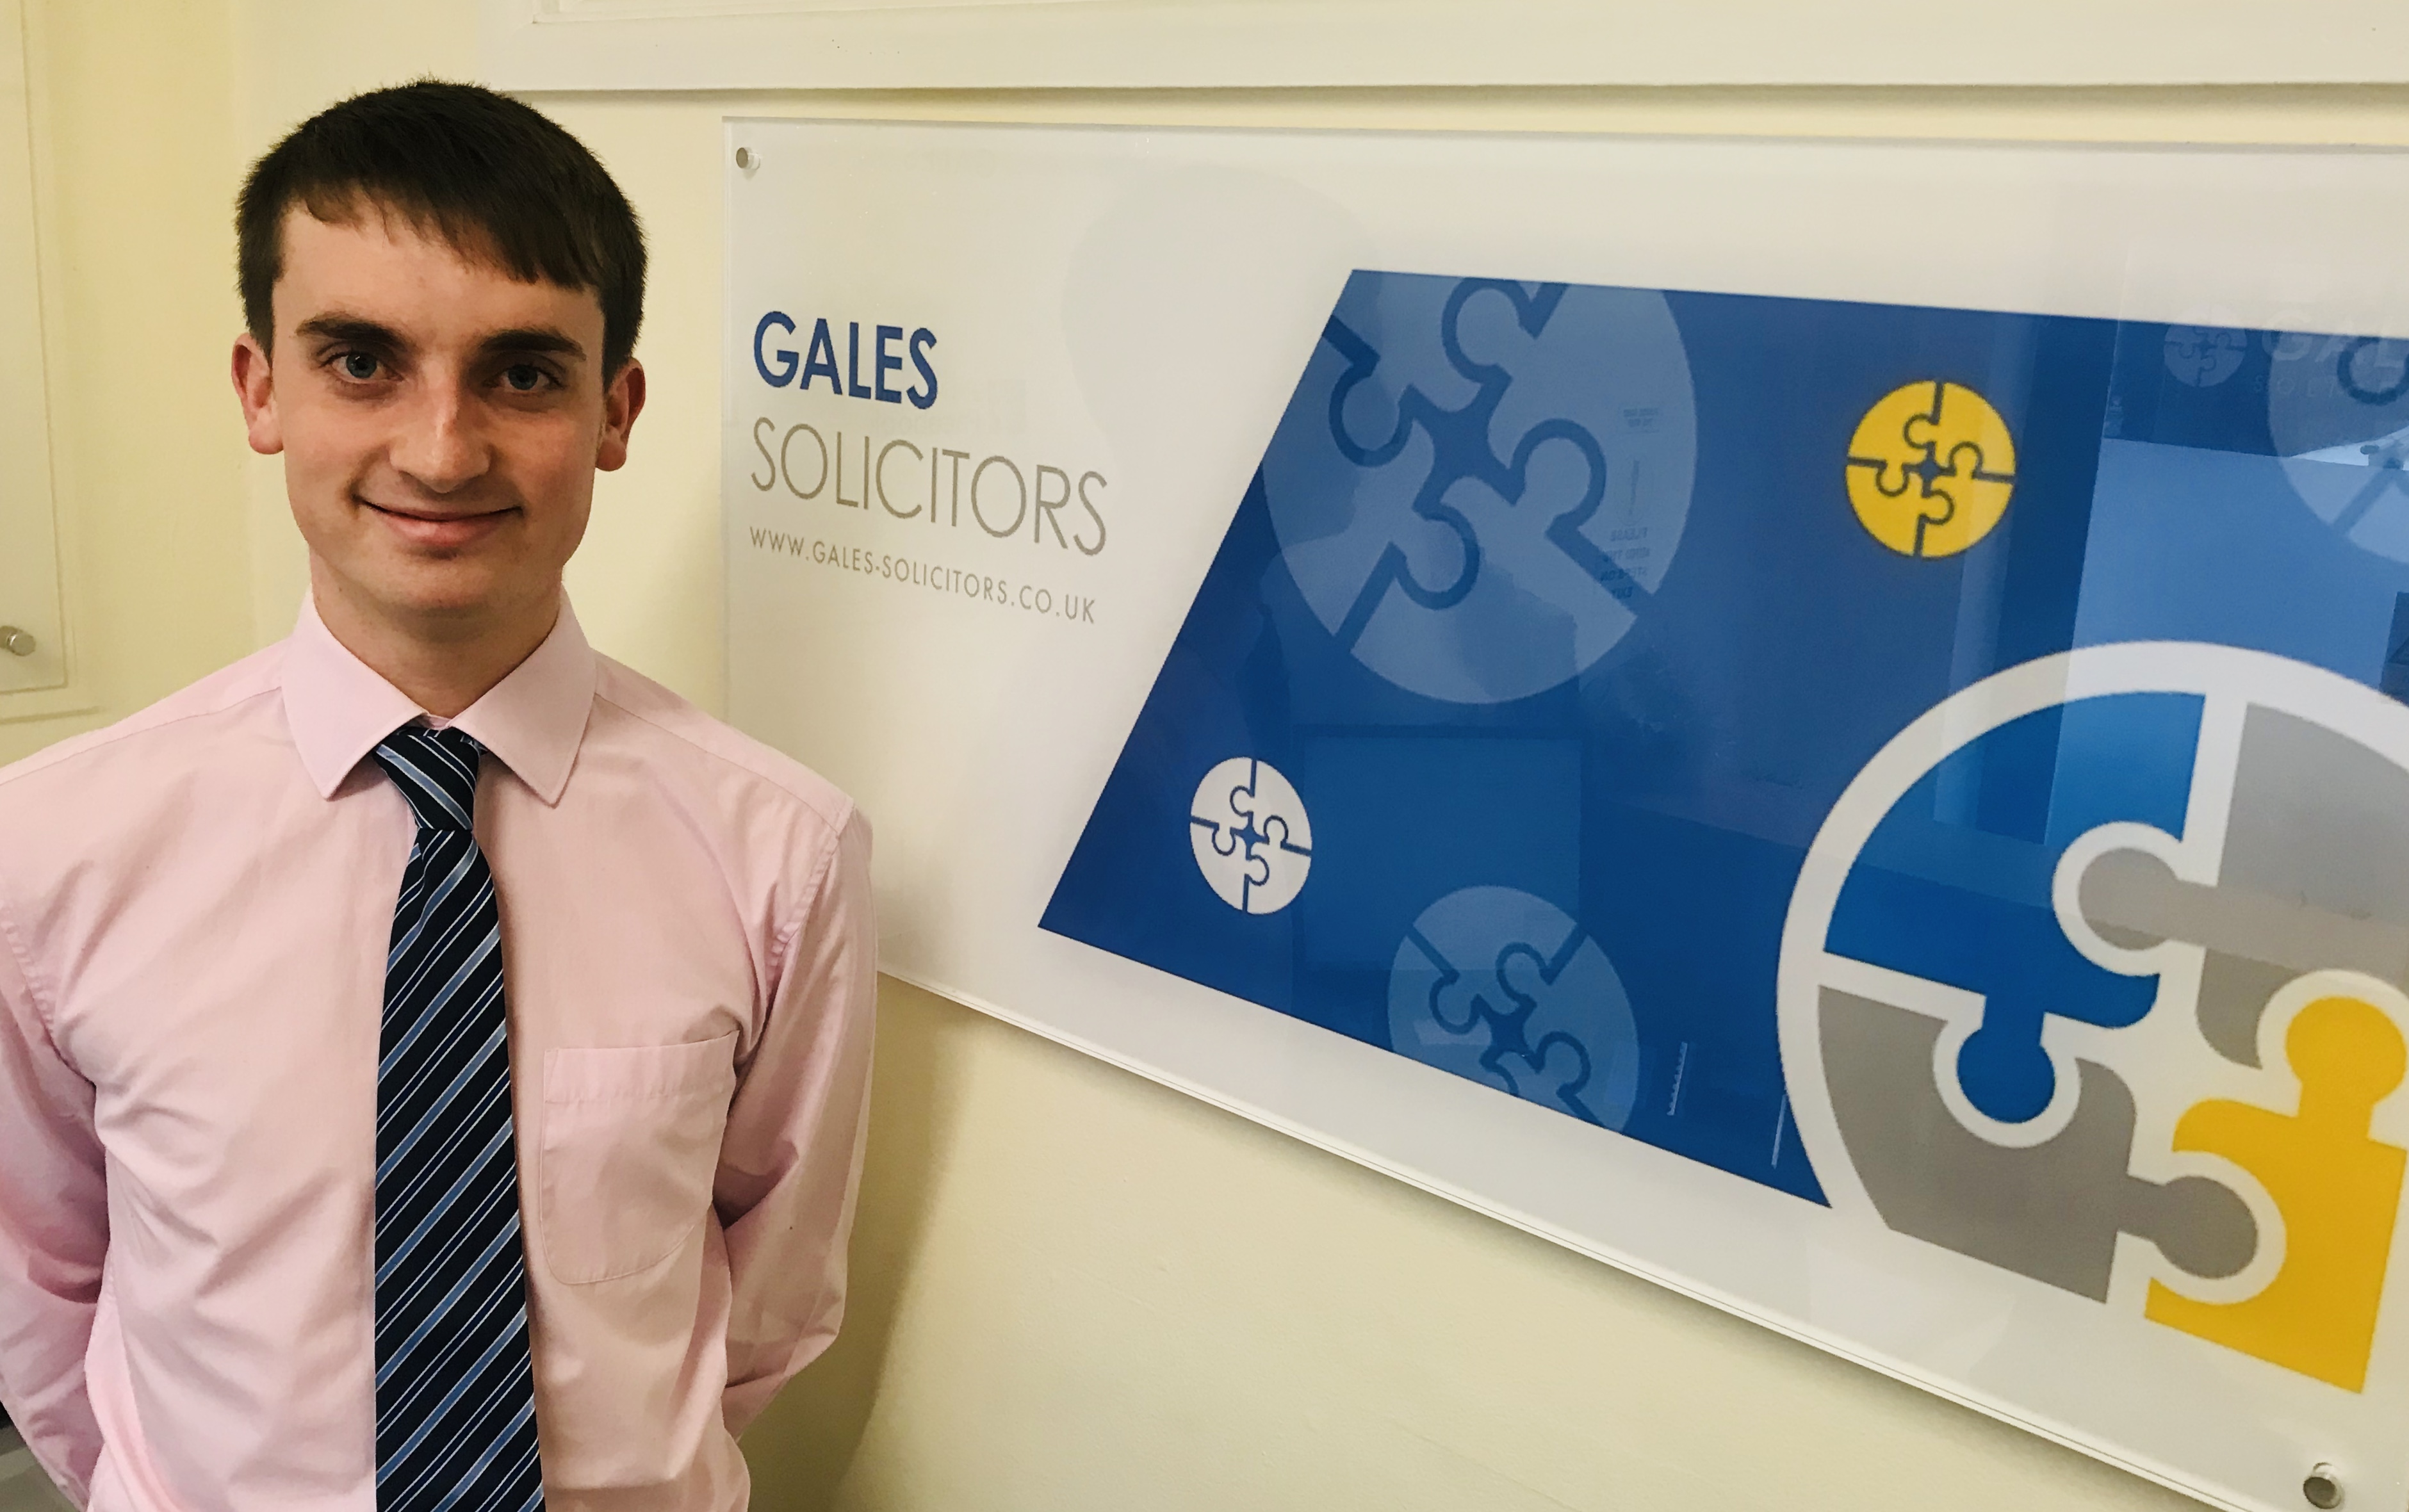 Bournemouth University Student James takes up placement at Gales Solicitors